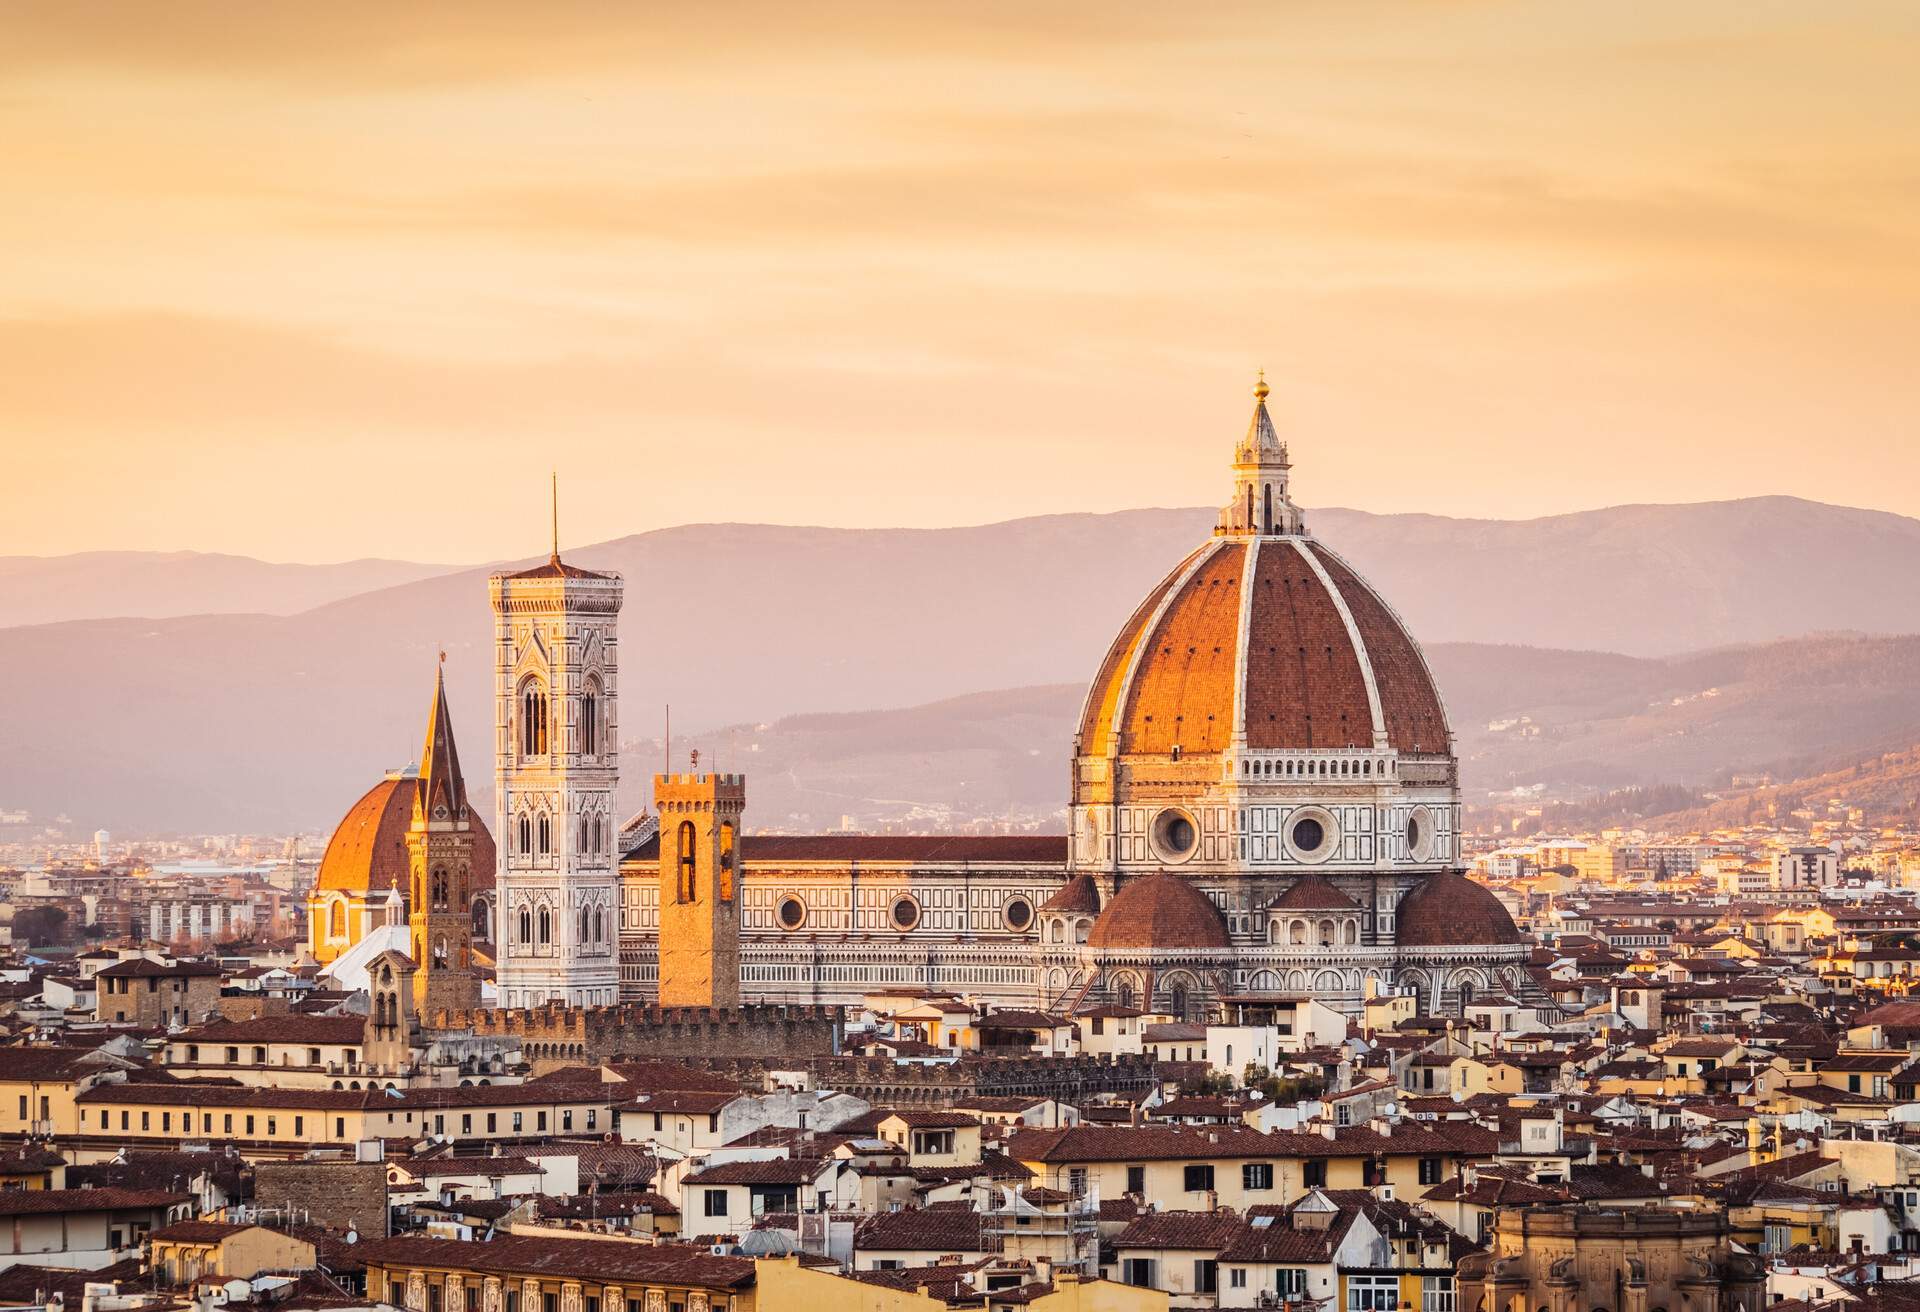 DEST_ITALY_FLORENCE_CATHEDRAL_GettyImages-511376784.jpg